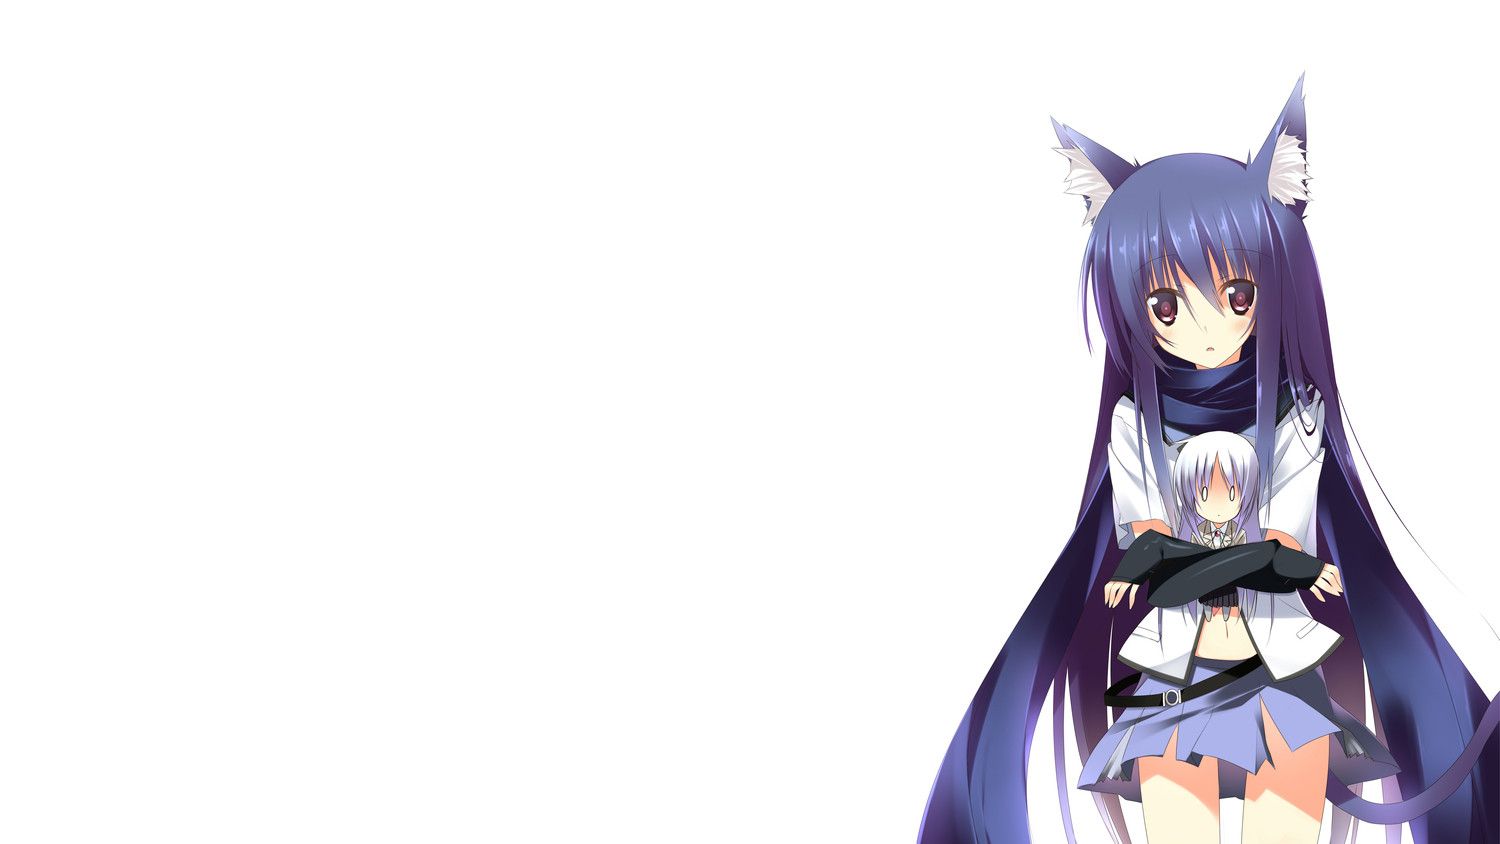 Download wallpaper from anime Angel Beats! with tags: Picture